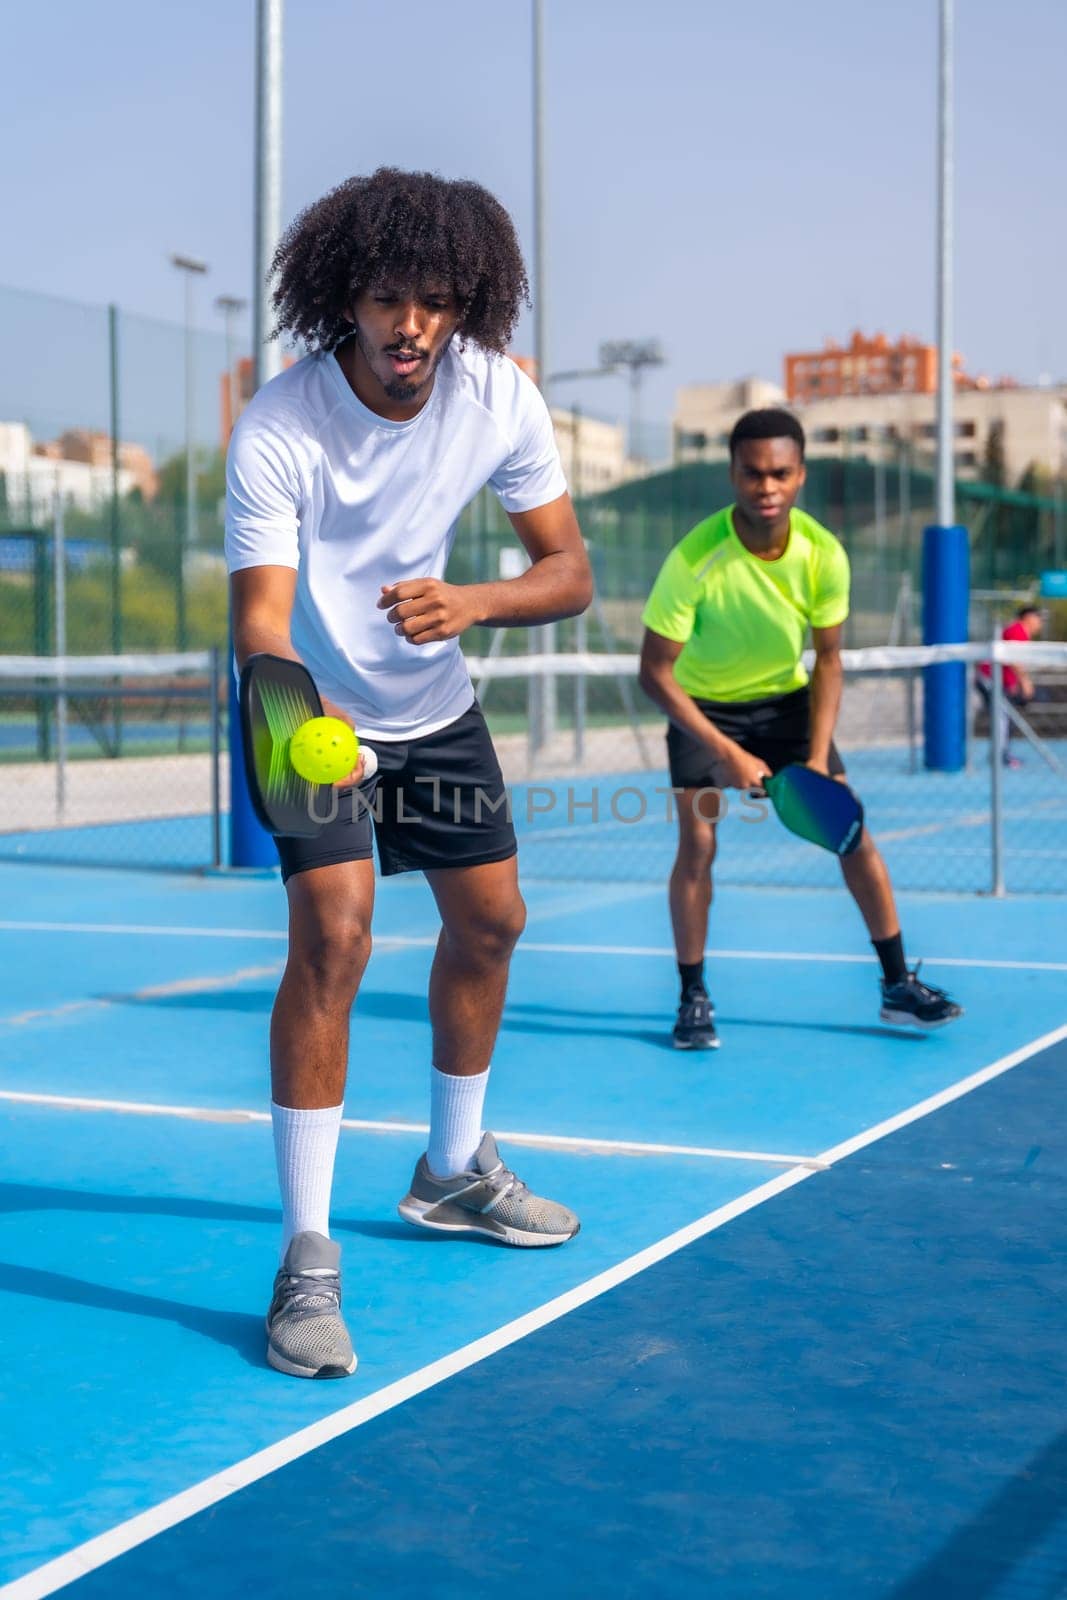 African sportive man serving ball during pickleball match by Huizi